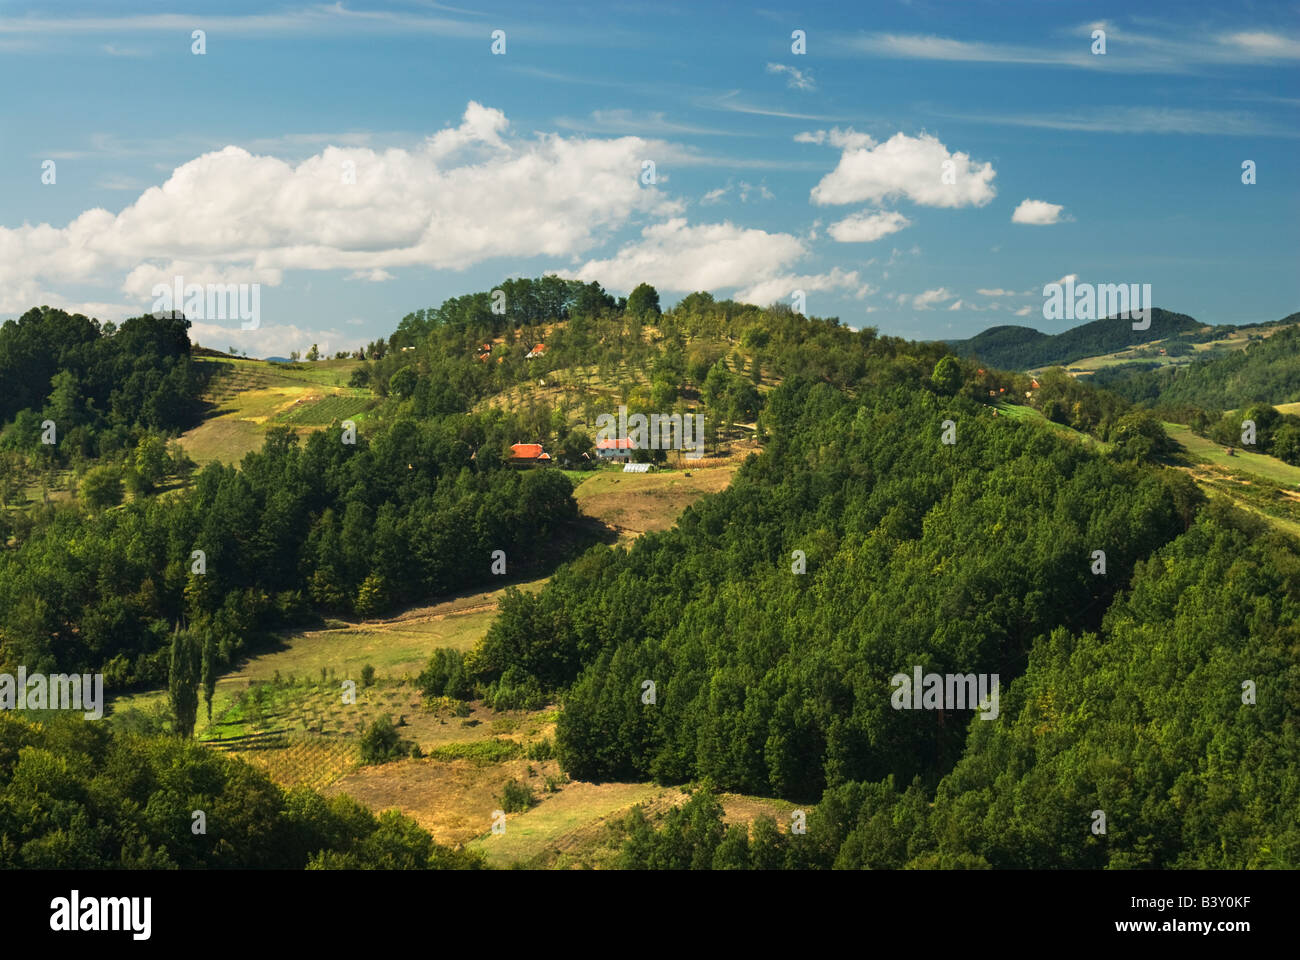 Serbian mountains scenery in Raska province, South-West Serbia Stock Photo